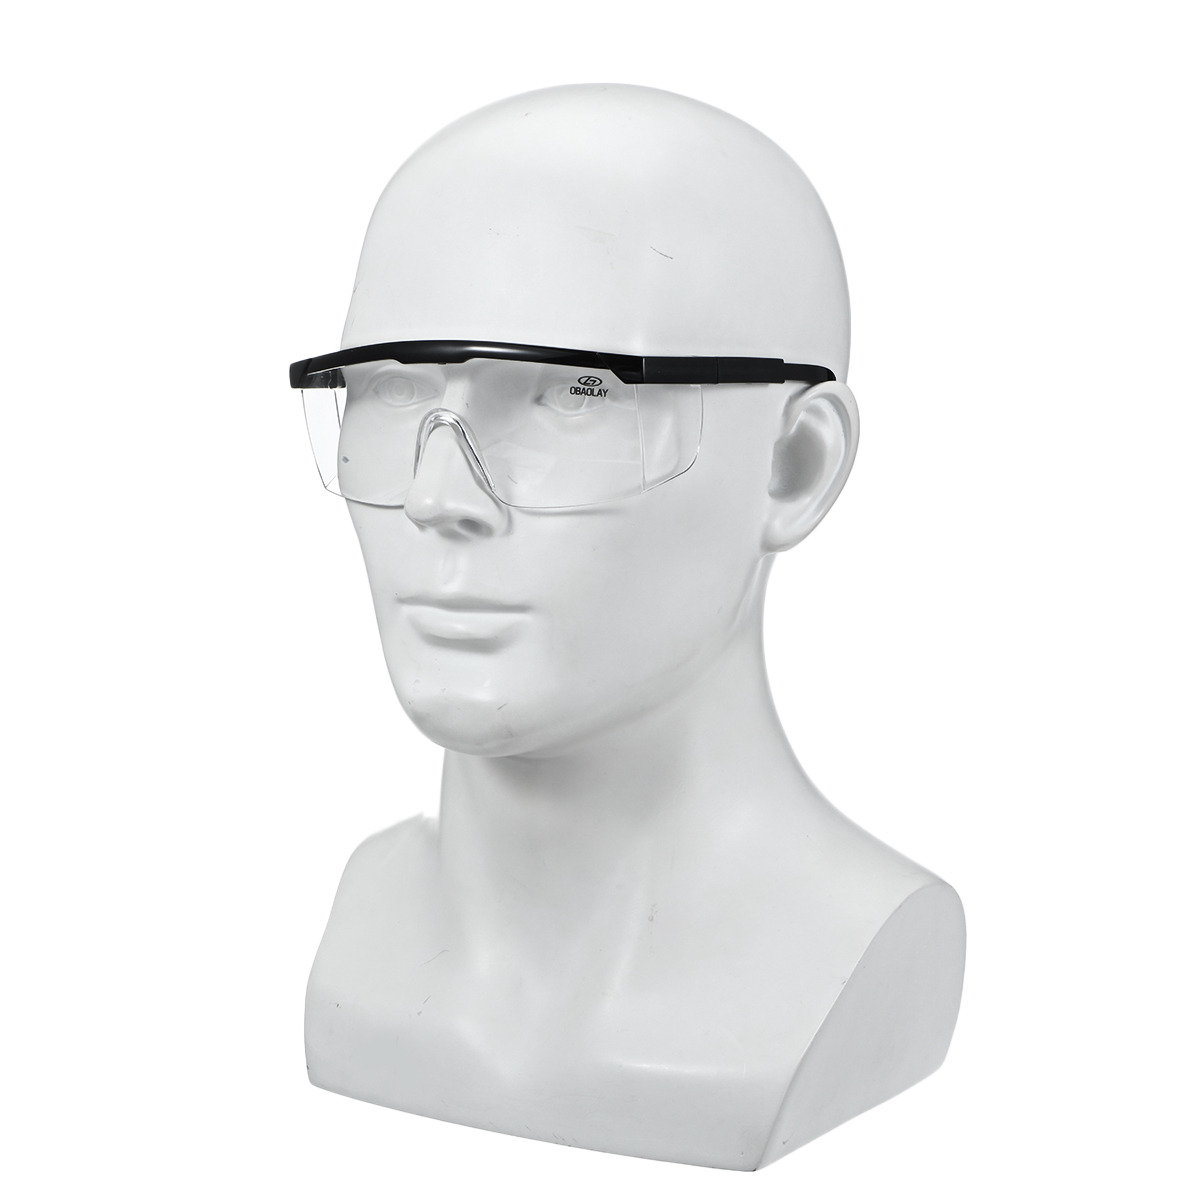 1PCS-Safety-Glasses-Work-Goggles-Eyewear-Protective-Industrial-Lab-Dust-Droplets-1889895-10